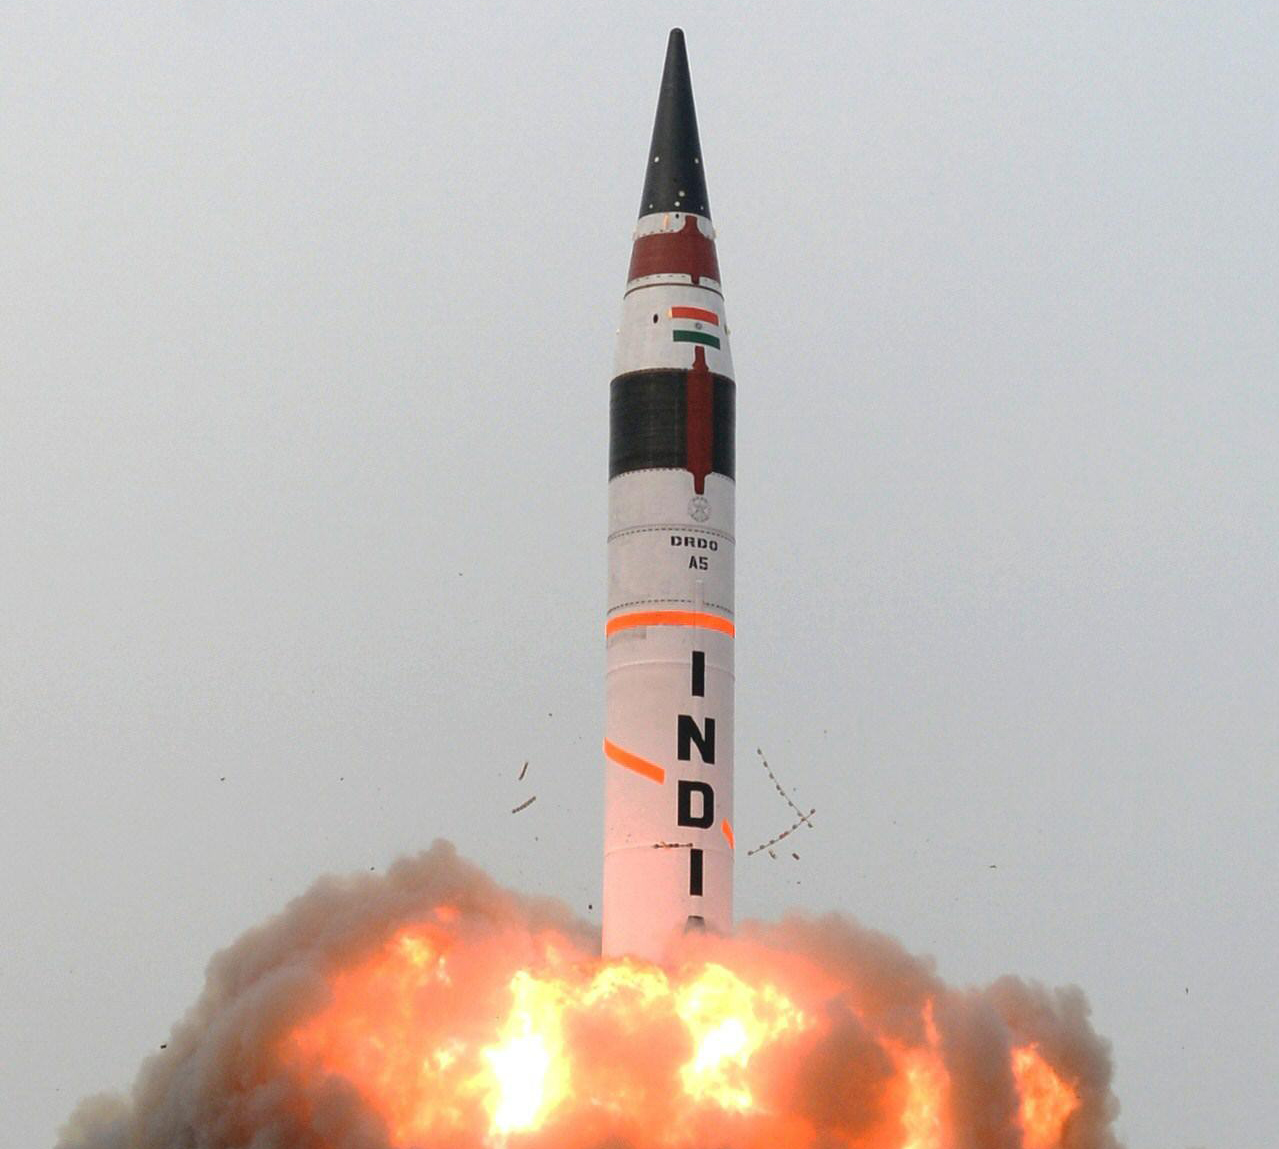 India's most lethal missile Agni-V successfully test fired